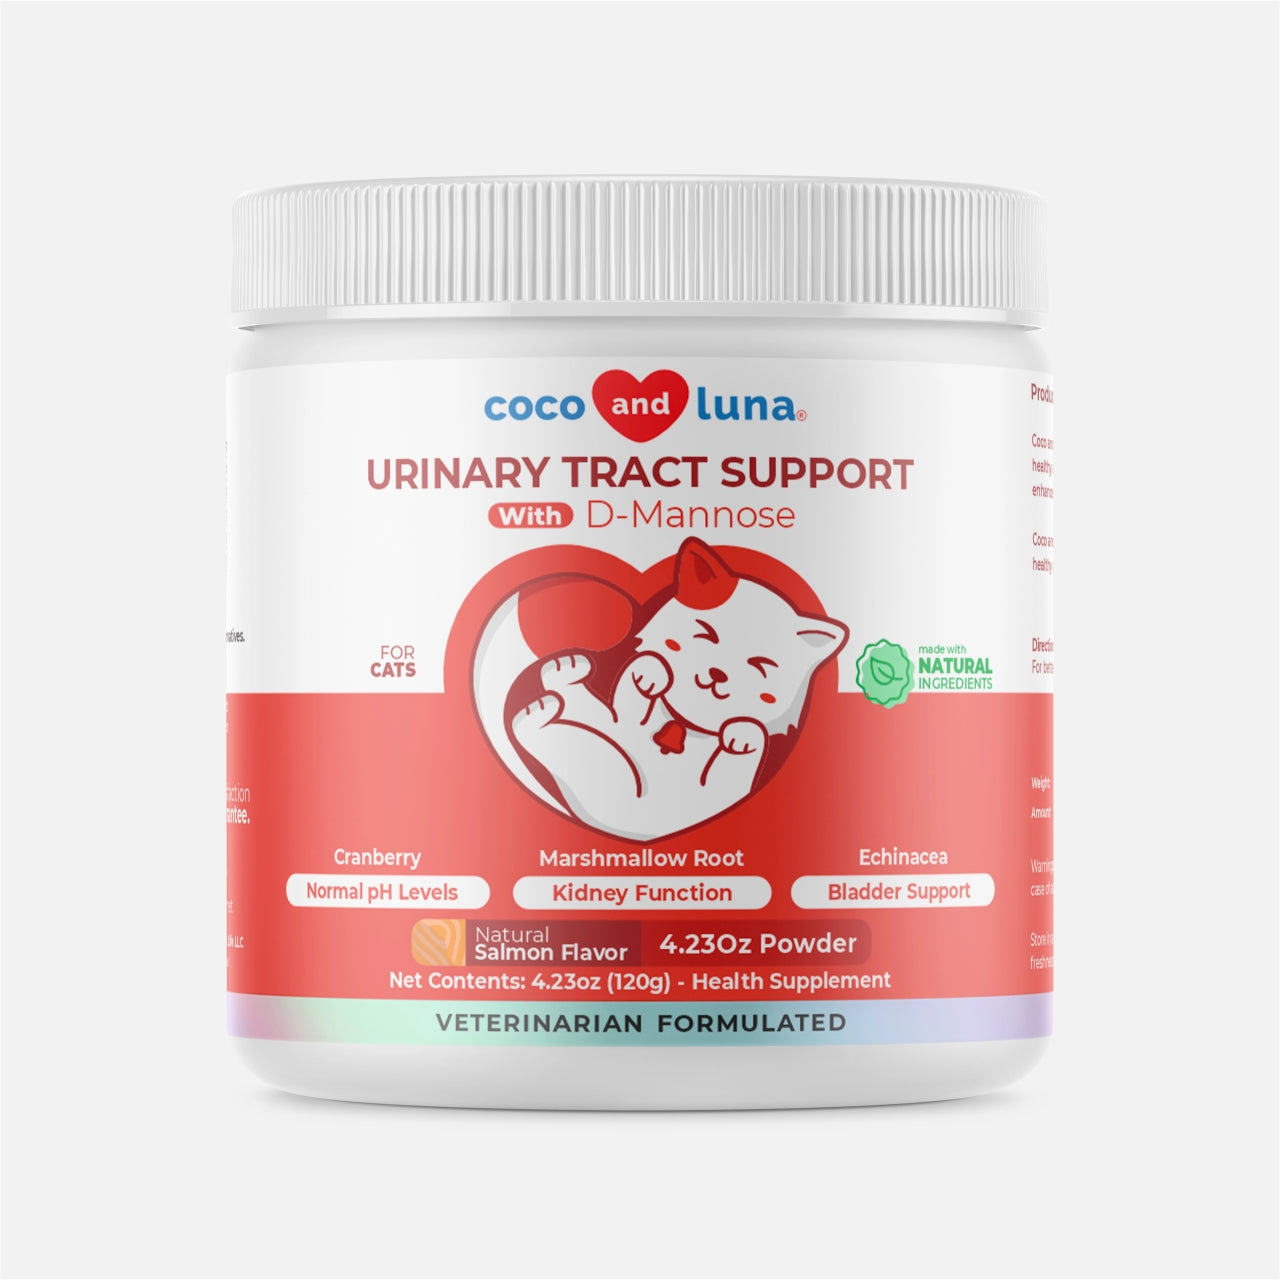 Urinary Tract Support for Cats -  120g Powder - Coco and Luna